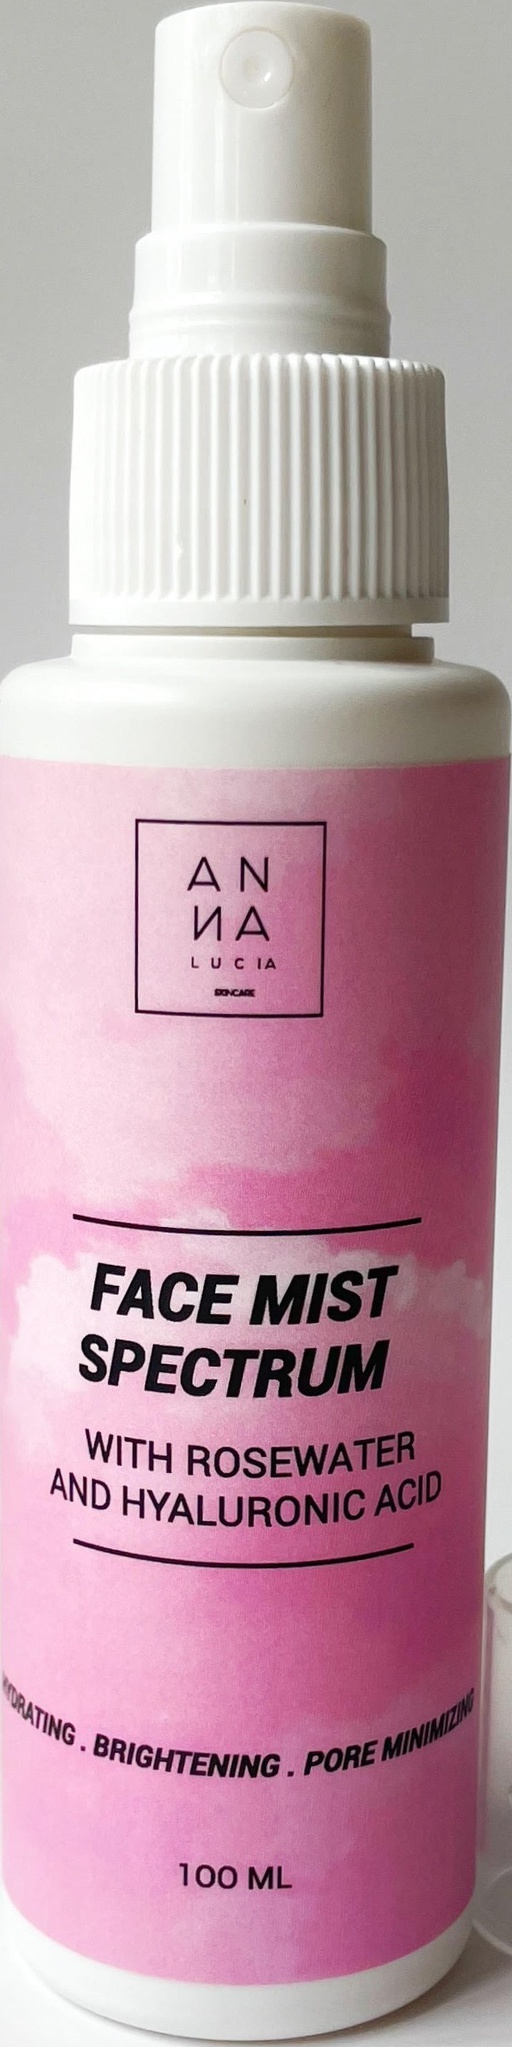 Anna Lucia Skincare Rosewater X Hyaluronic Acid Face Mist